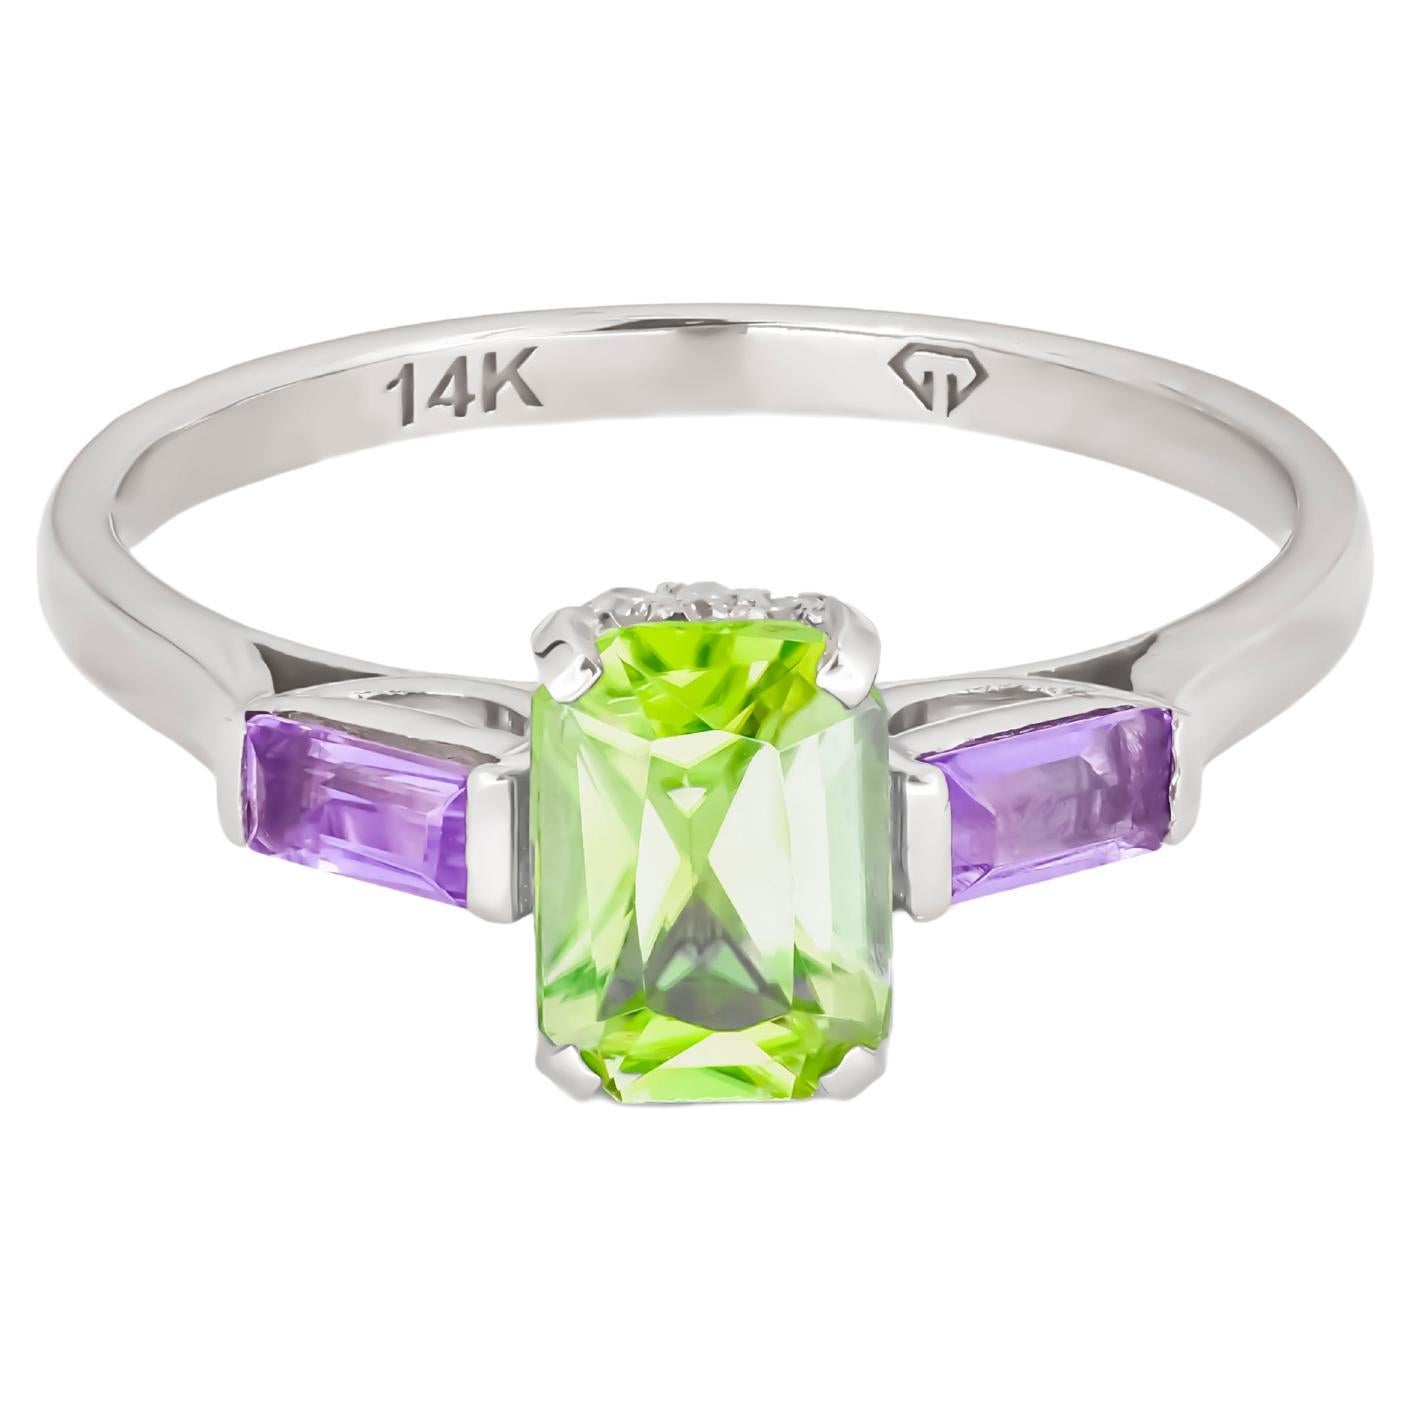 Octagon lab peridot 14k gold ring. For Sale